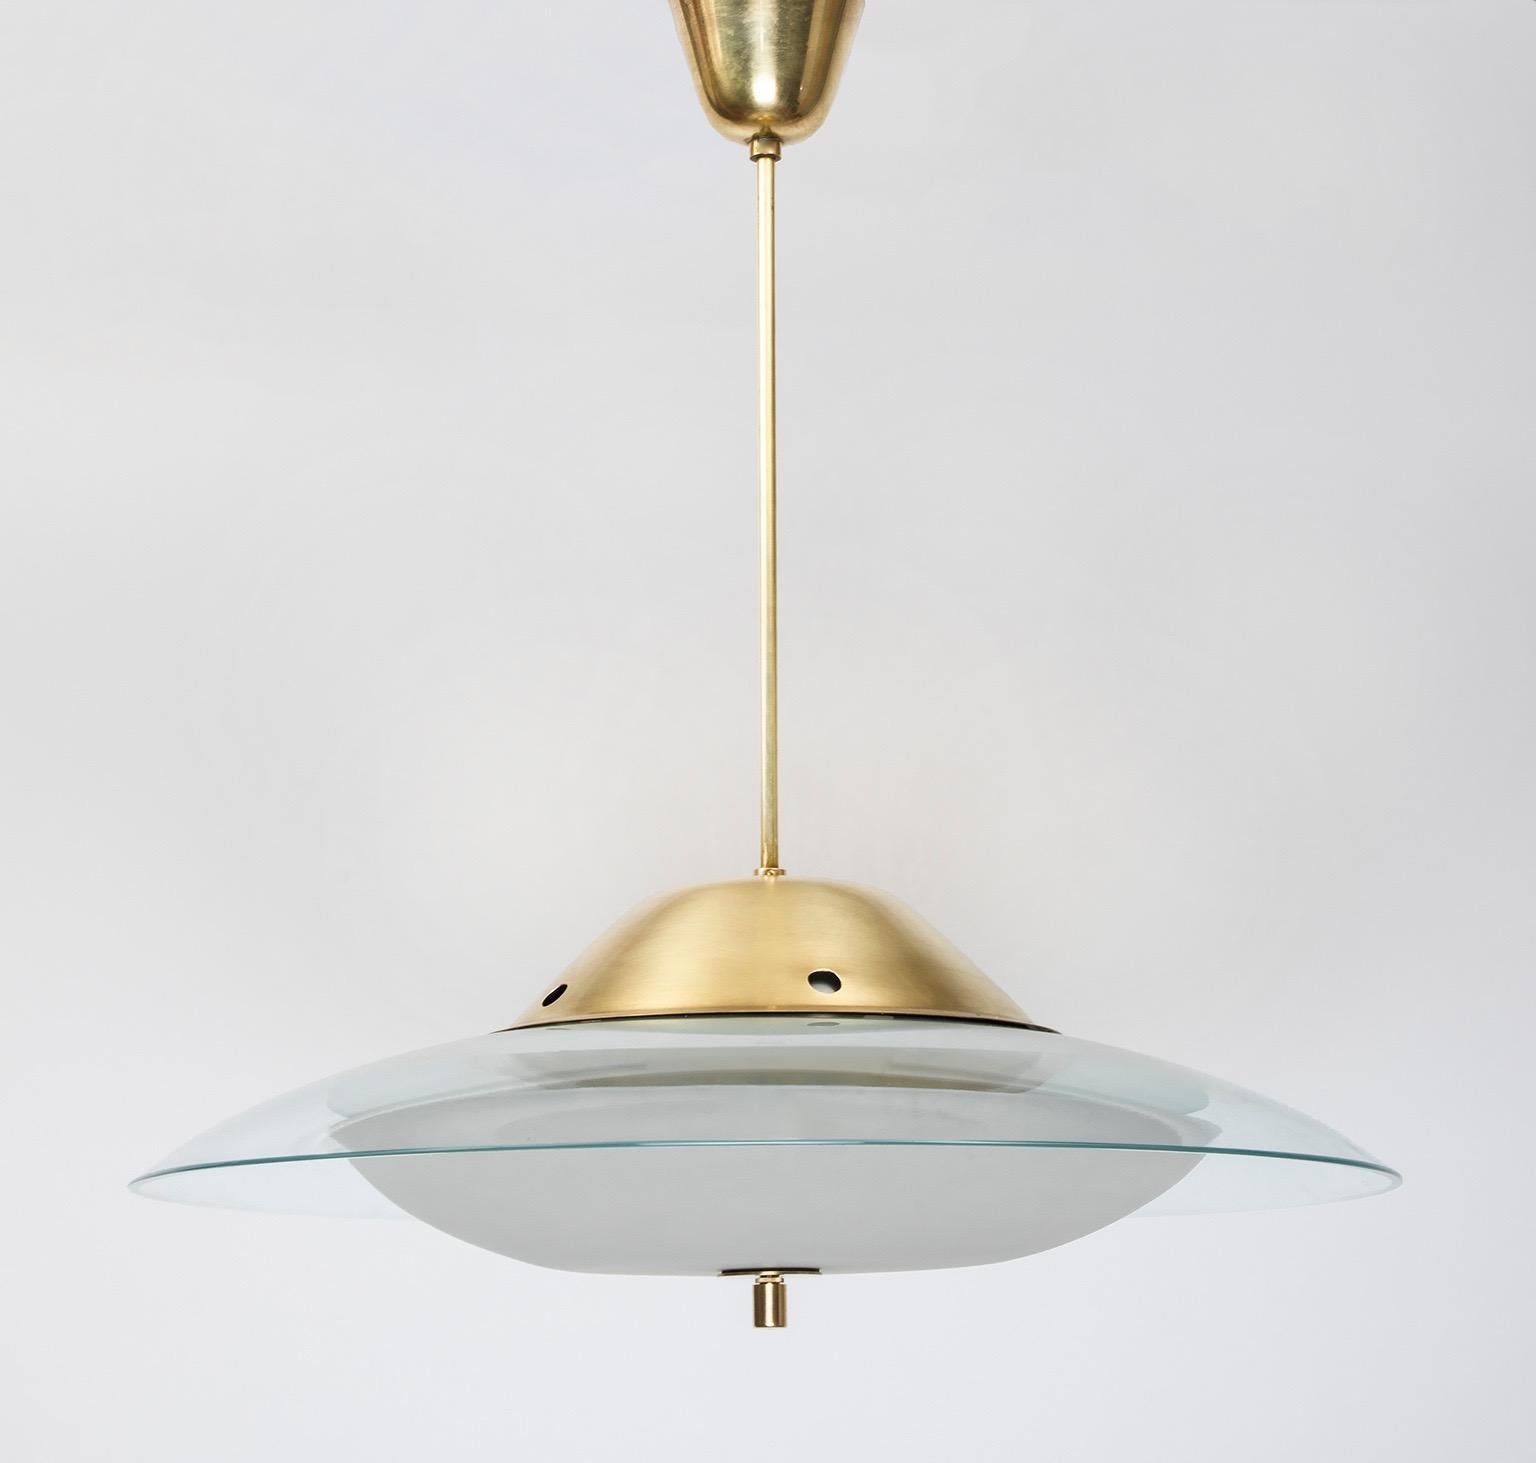 Max Ingrand (1908–1969)

A graceful and minimalist chandelier by Max Ingrand for Fontana Arte, with a frosted glass bowl and a large contrasting curved crystal shade, supported by slender polished brass hardware. 

Signed. 

24